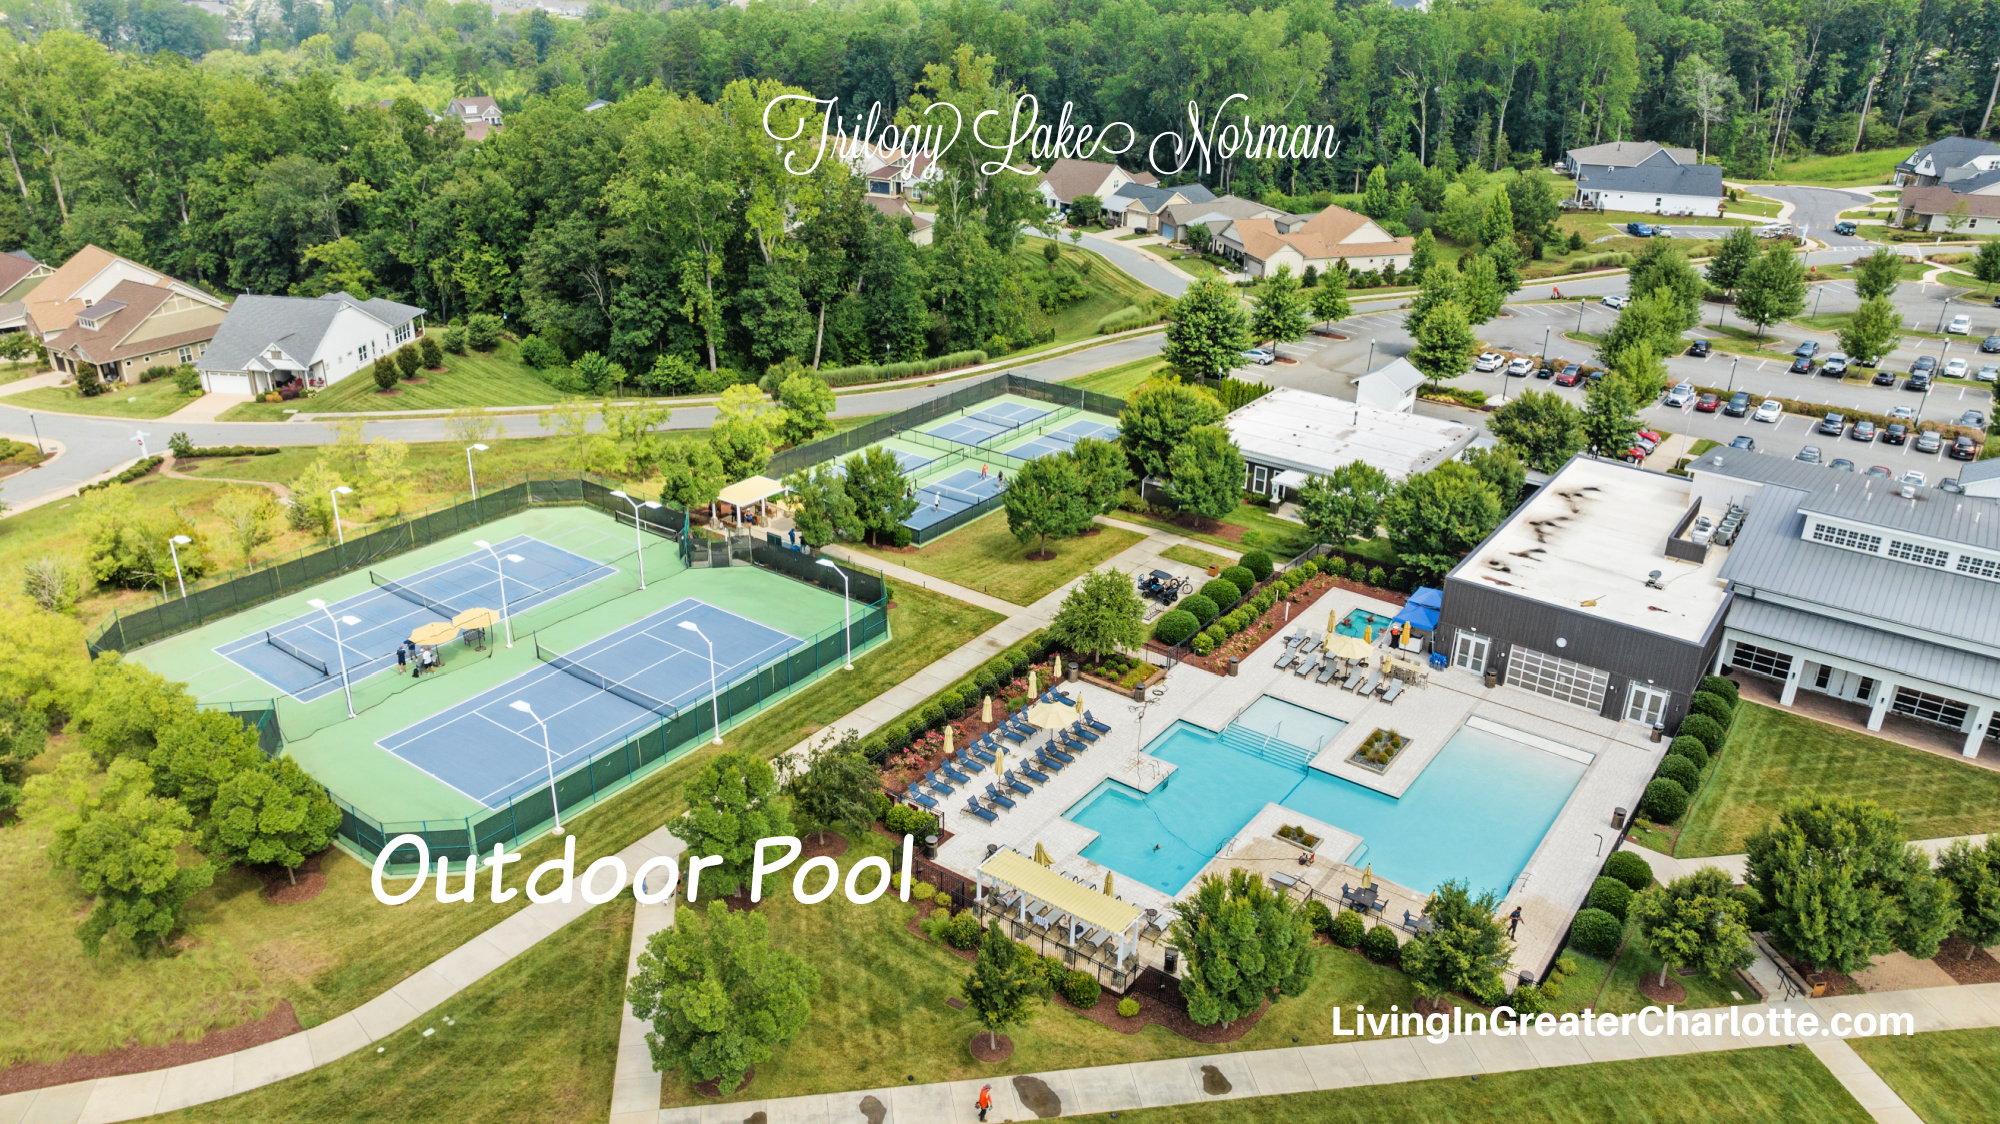 Trilogy Lake Norman Outdoor Pool - 55+ Community in Denver NC Amazing Amenities